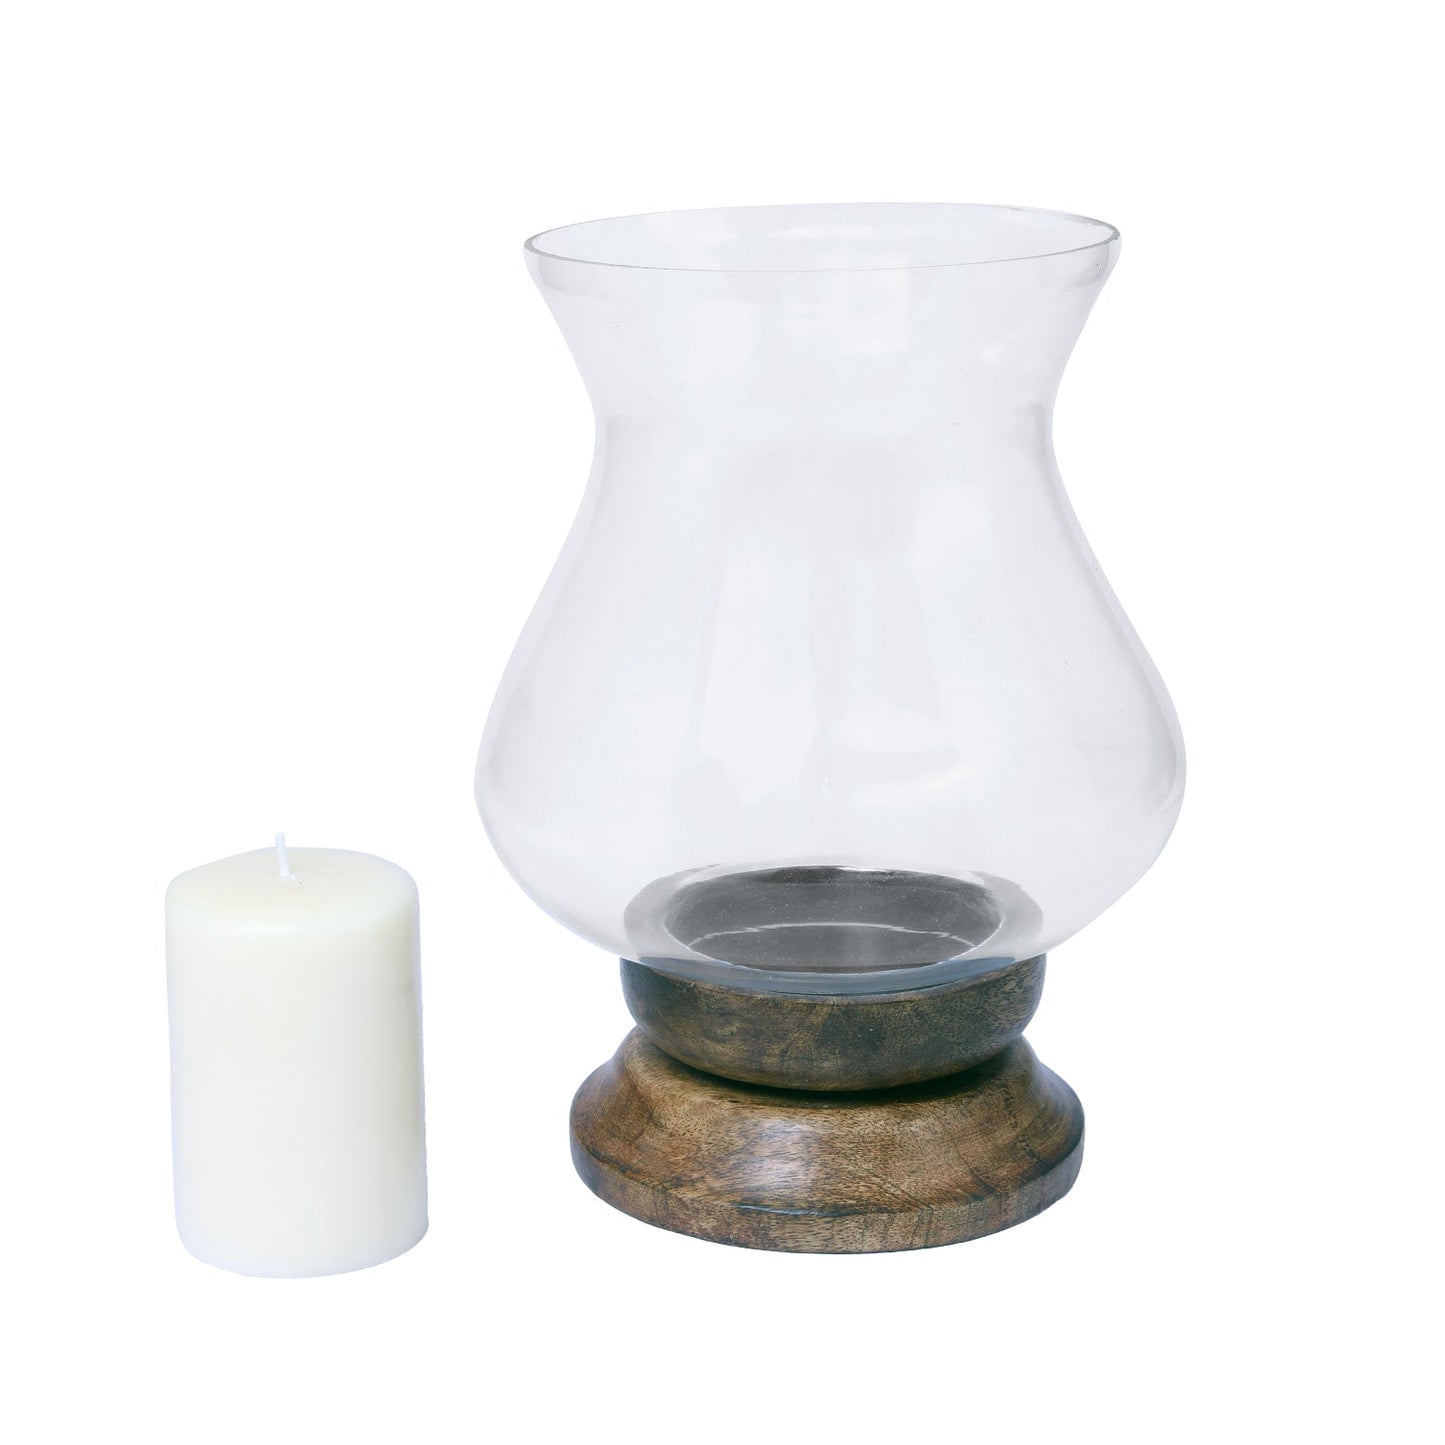 HOSLEY Pillar Candle Holder Beautiful Table Top Candle Holder with Pillar Candle made from Wood & Glass, Clear, Pack of 1